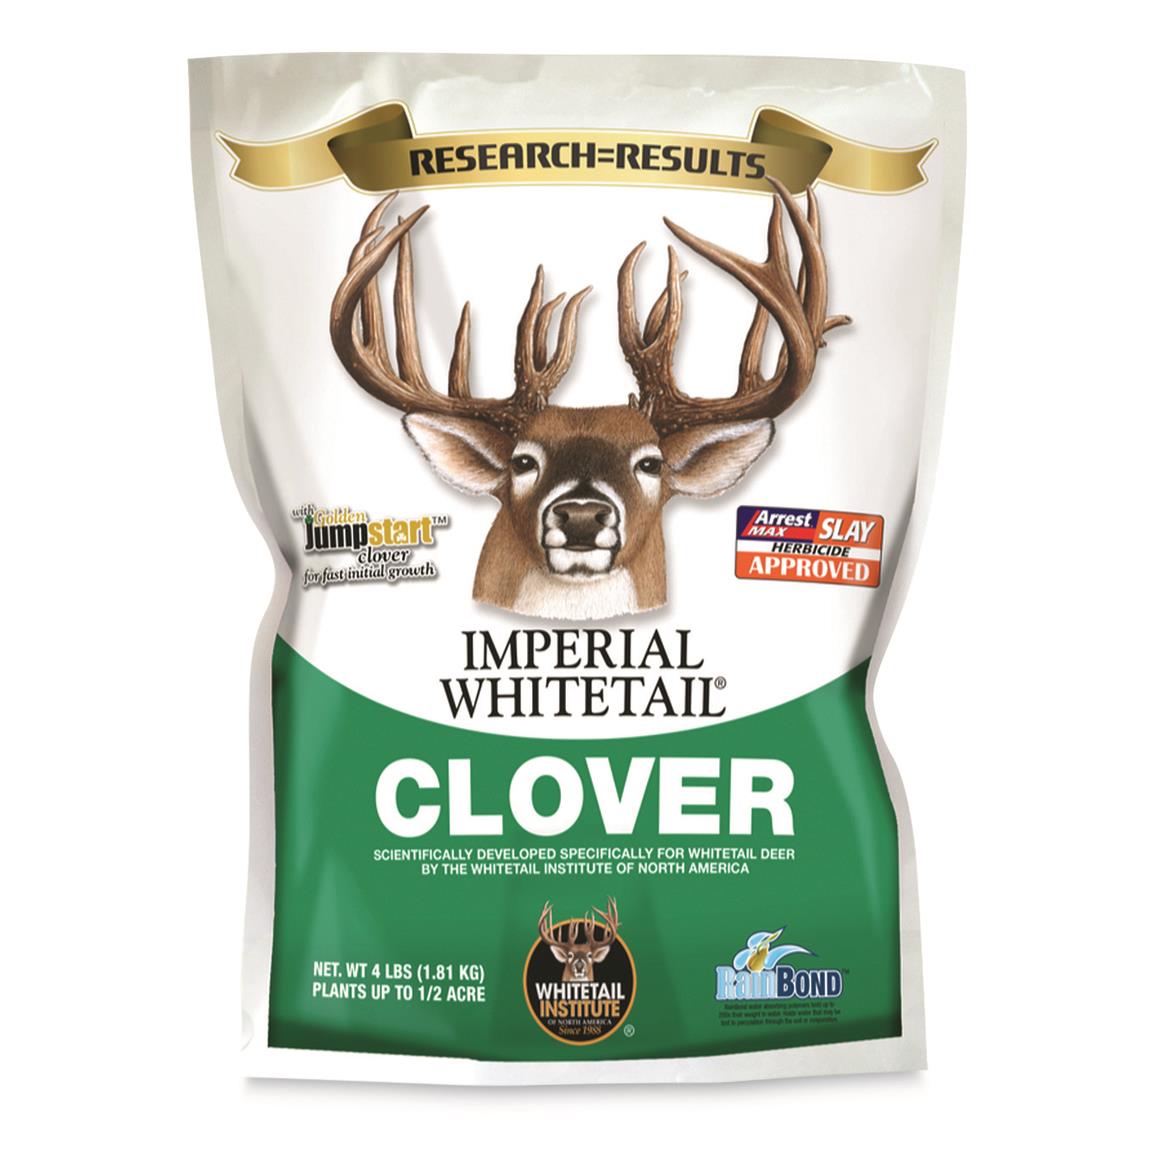 Whitetail Institute Imperial Whitetail Clover Seed, 4-lb. Bag